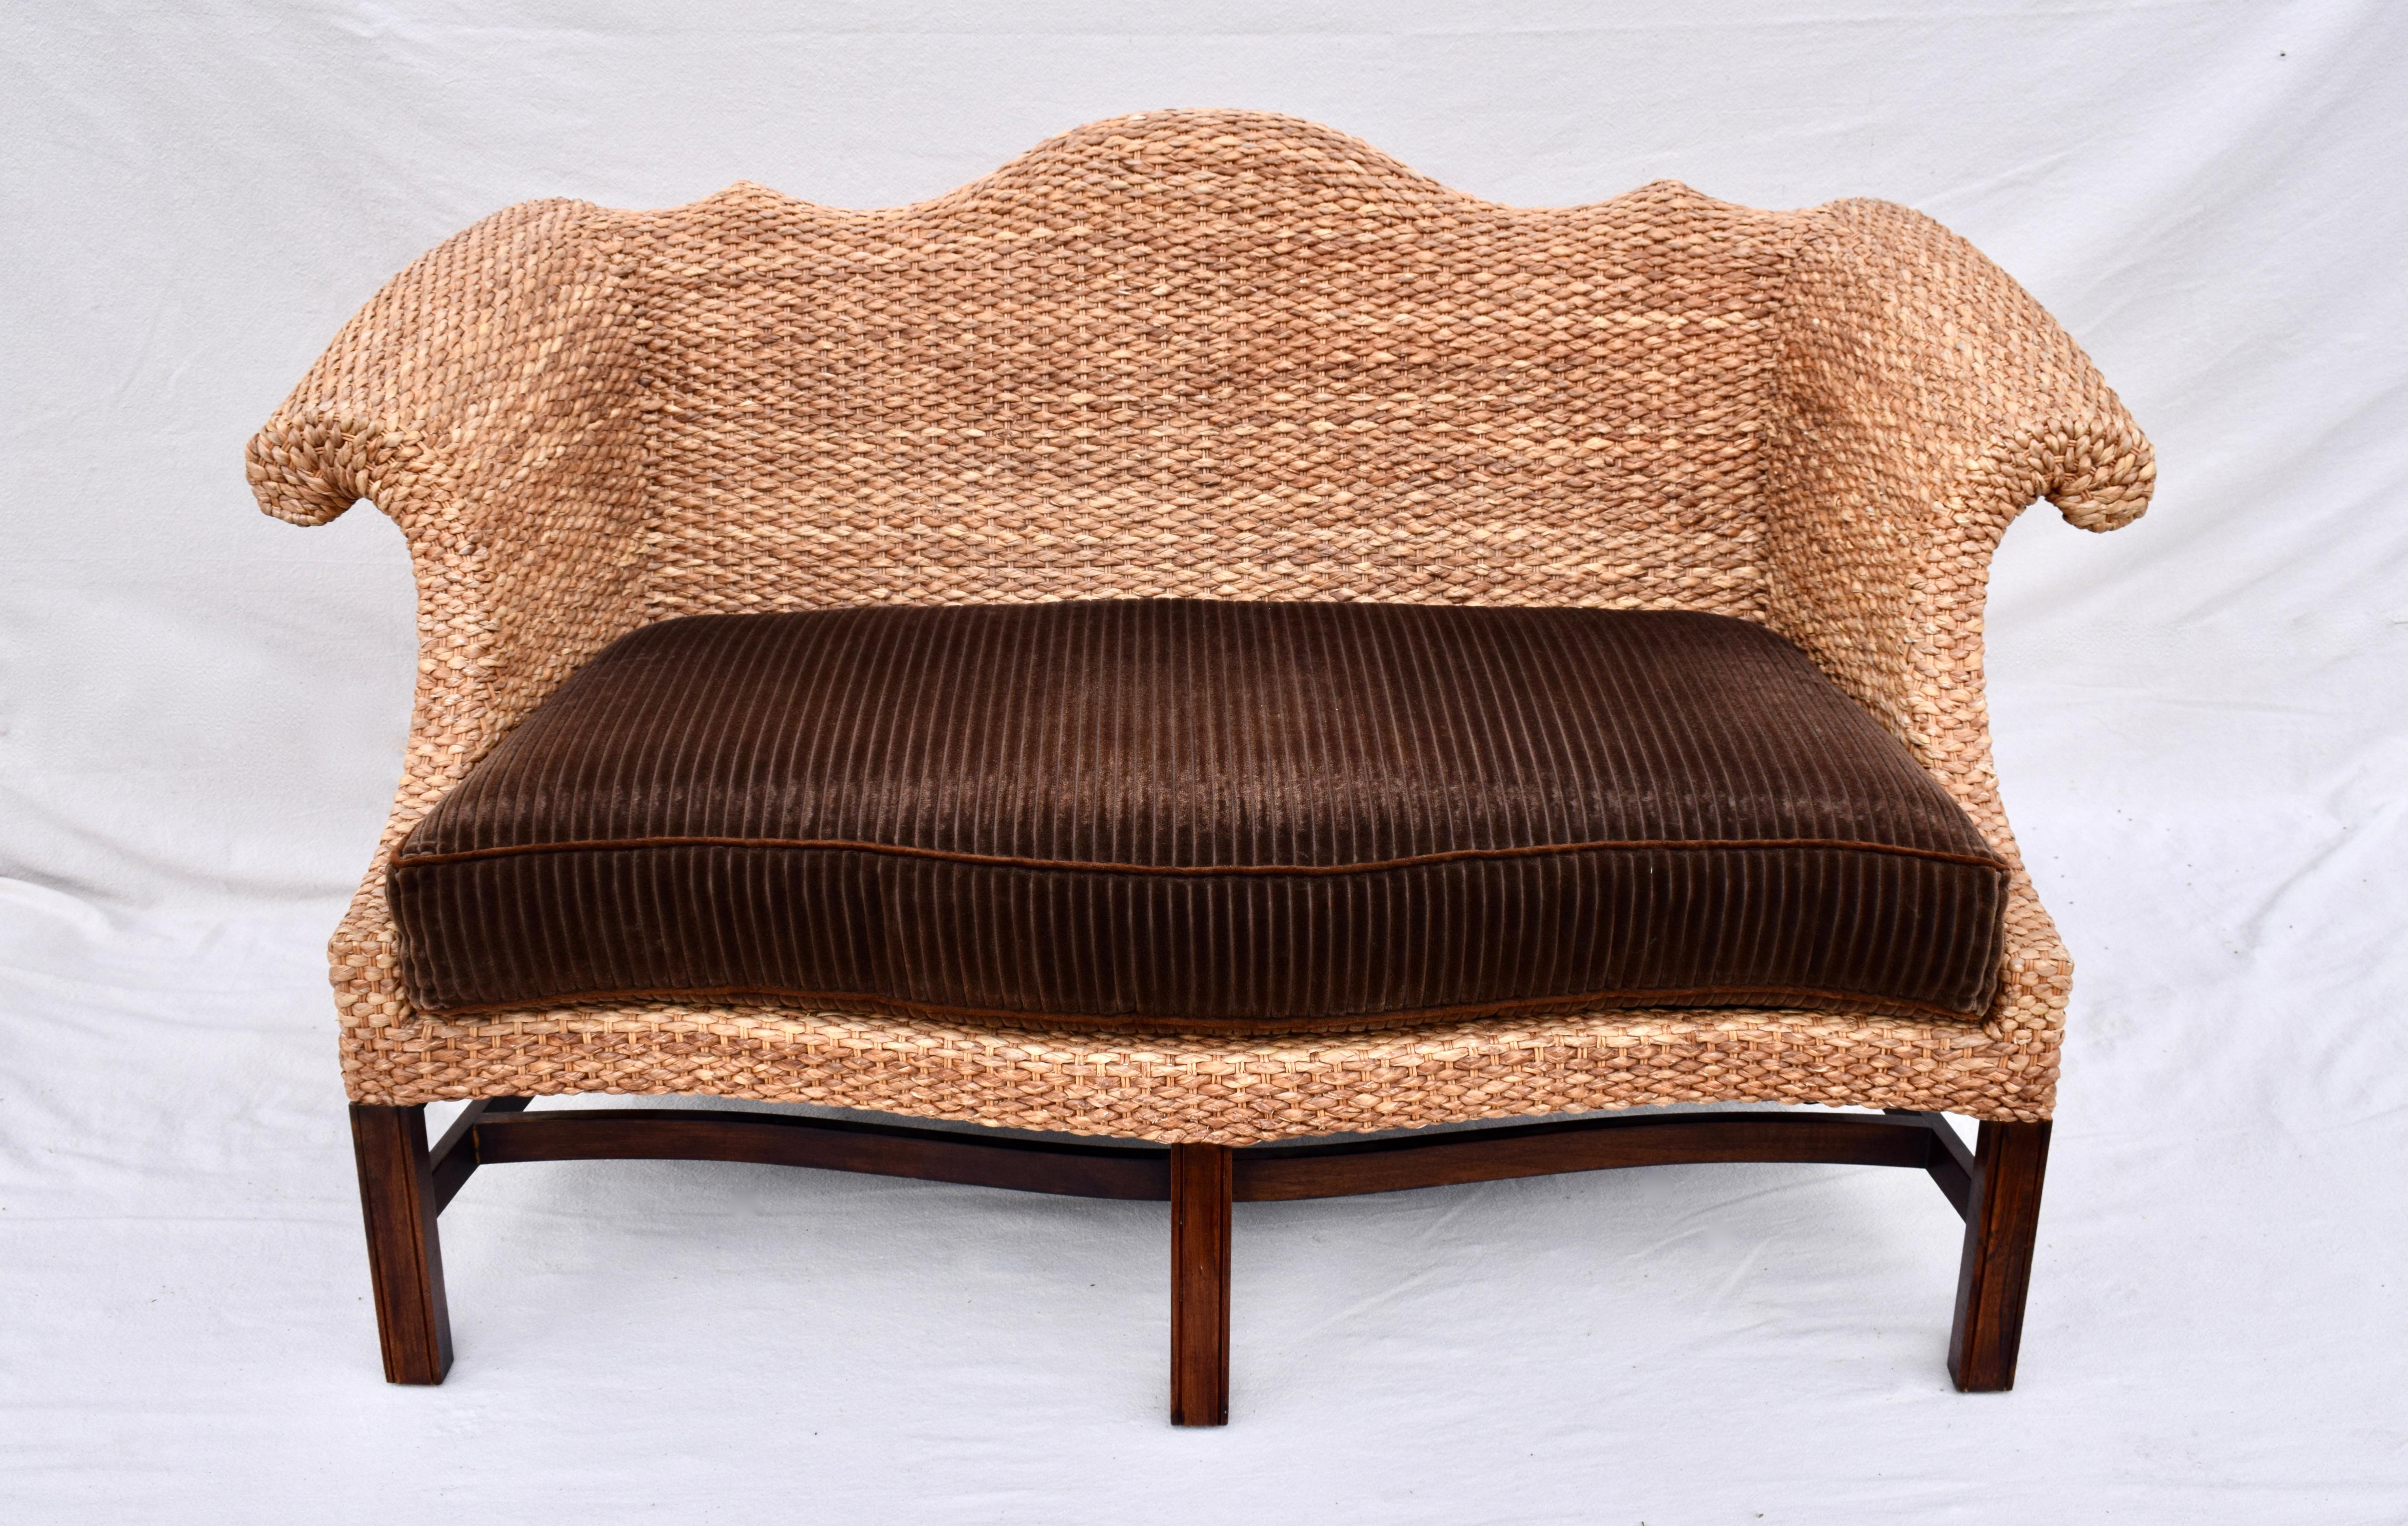 Rarely seen whimsical small scale George III style camel back sofa in the Chippendale manner by Baker Milling Road Furniture. Features most interesting materials in the tightly woven water hyacinth rattan and solid walnut frame, plush goose down